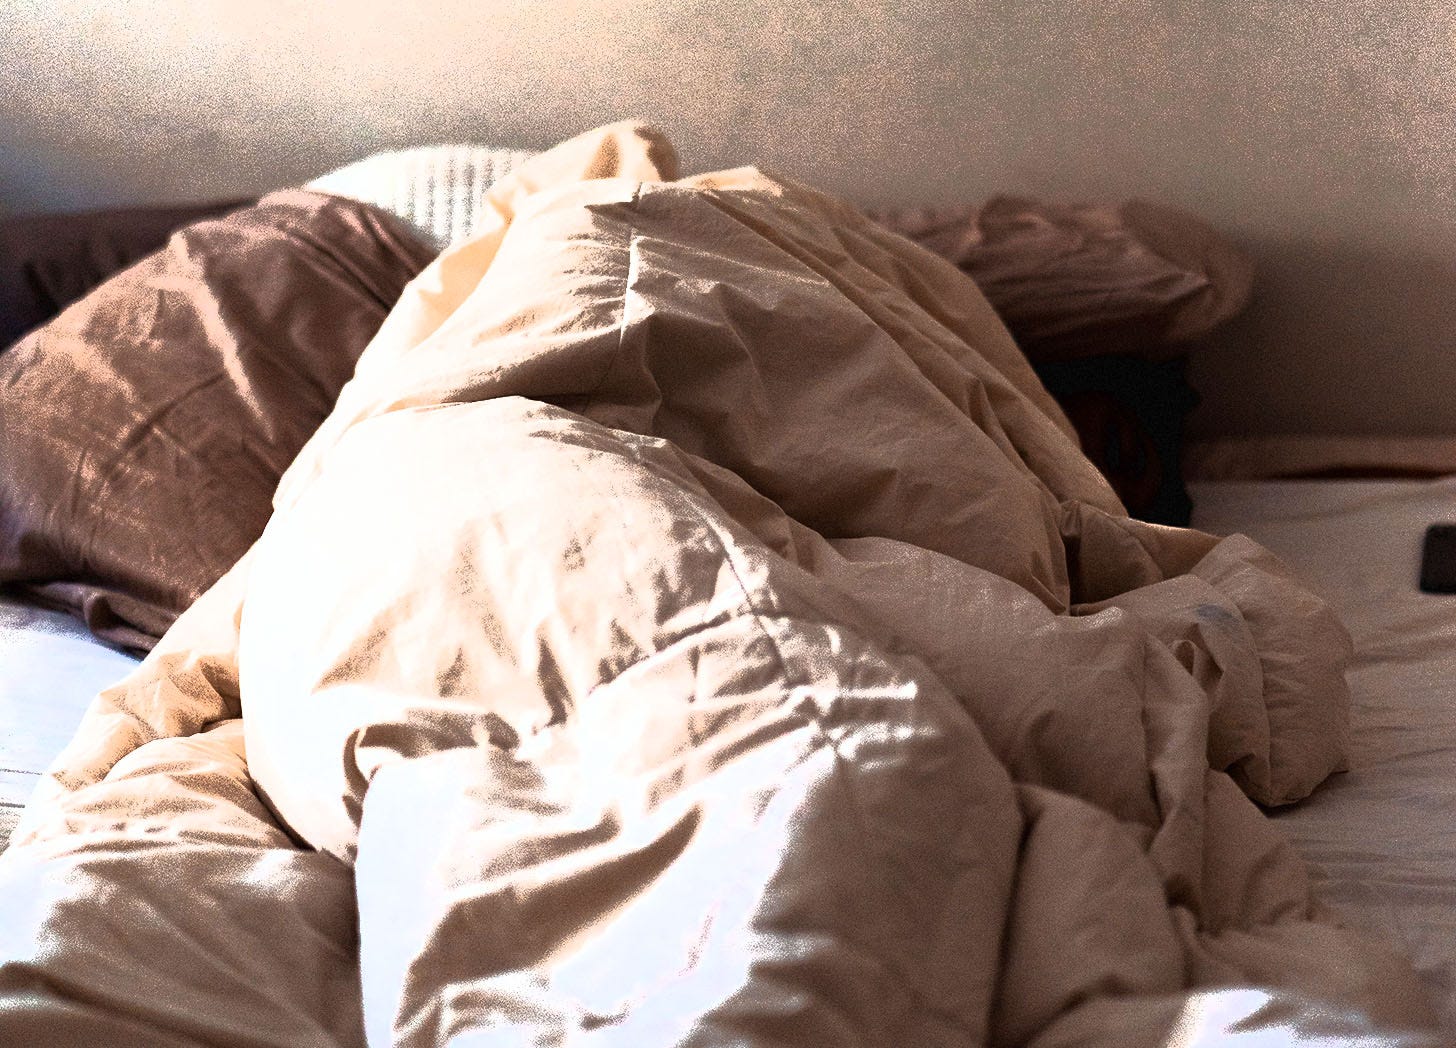 a person in bed and completely covered by a blanket